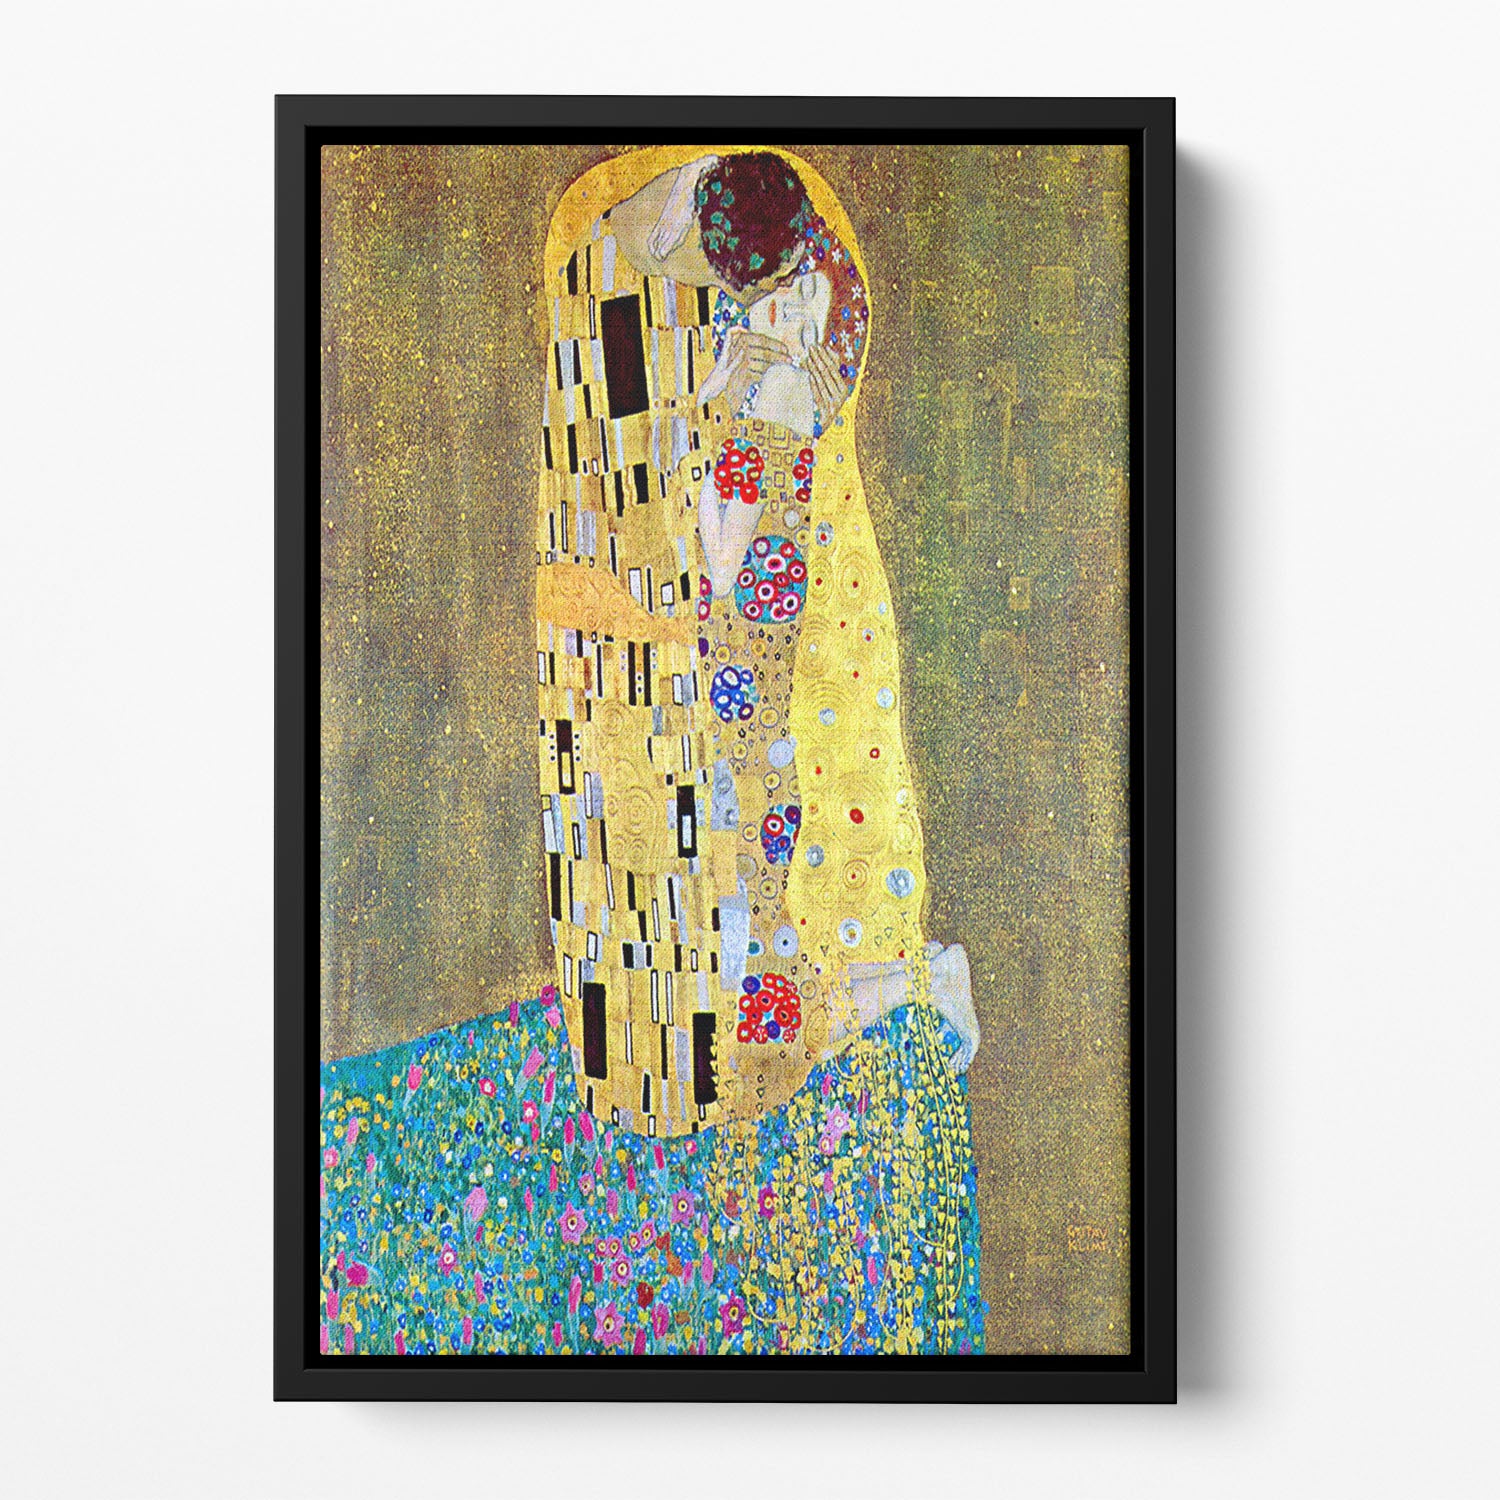 The Kiss 2 by Klimt Floating Framed Canvas